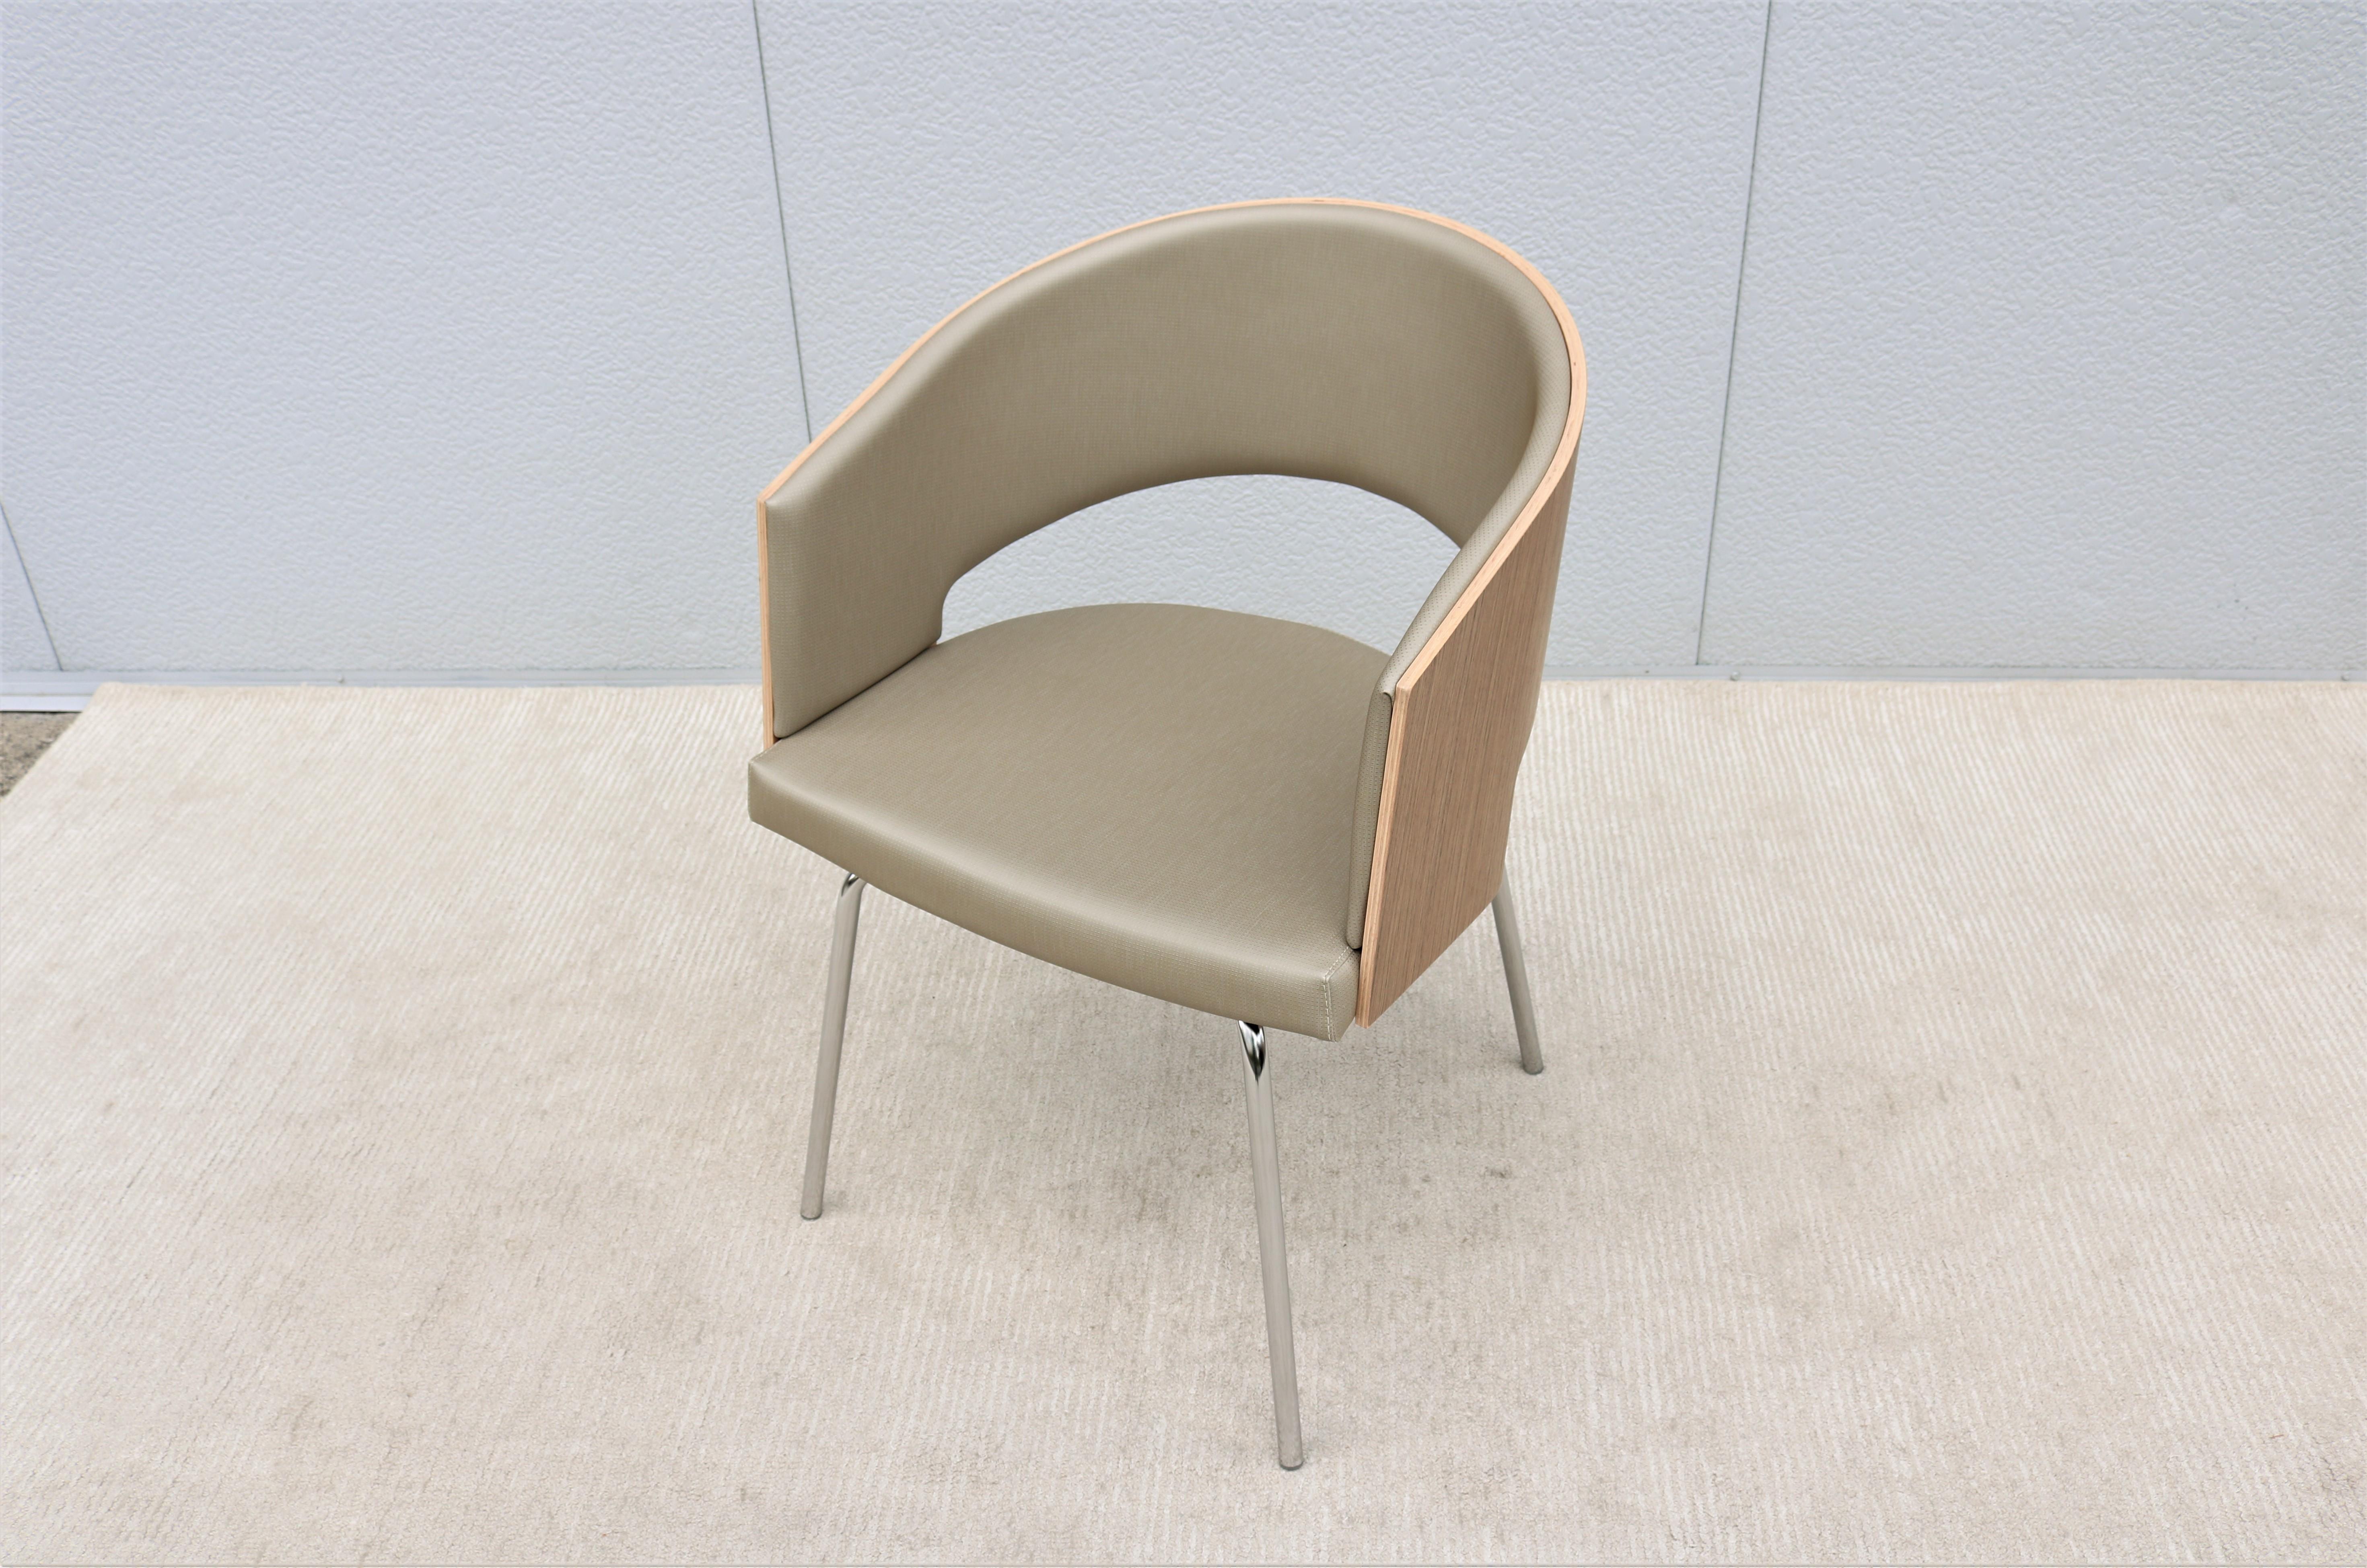 American Contemporary Modern Source Botte Multiuse Dining Chair Brand New, 7 Available For Sale